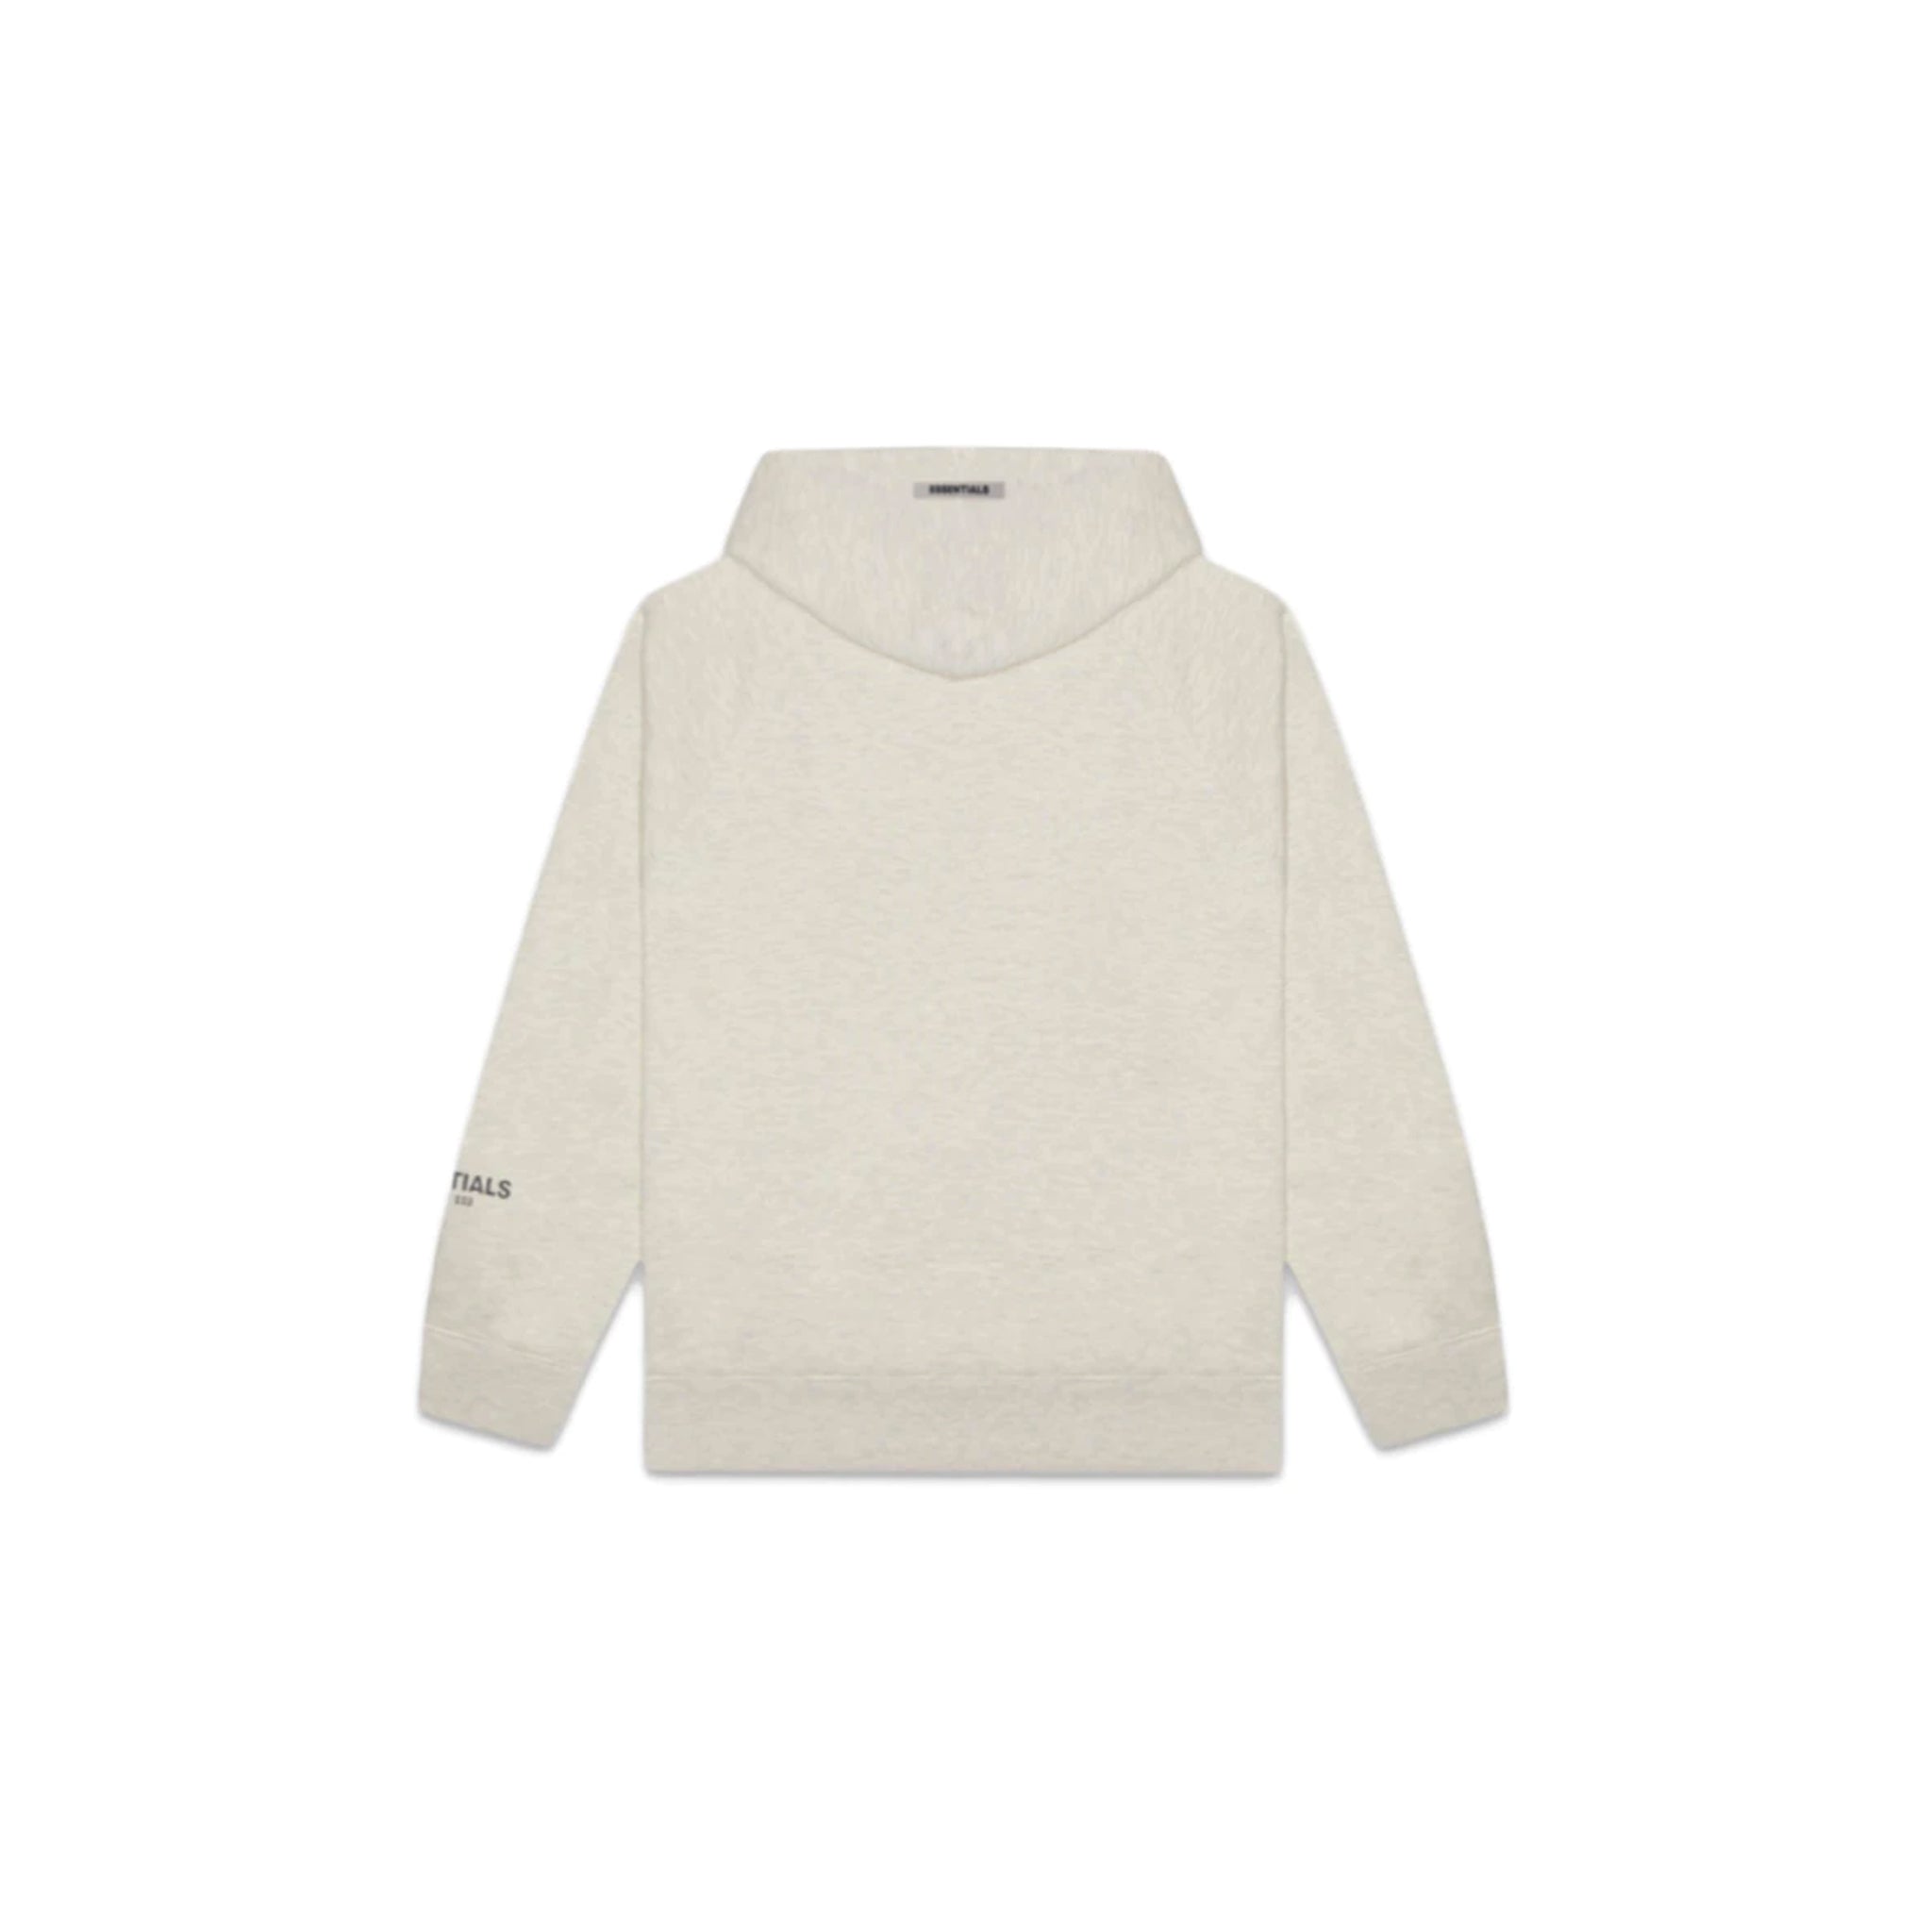 FEAR OF GOD ESSENTIALS 3D SILICON APPLIQUE PULLOVER HOODIE (SS20) OATMEAL